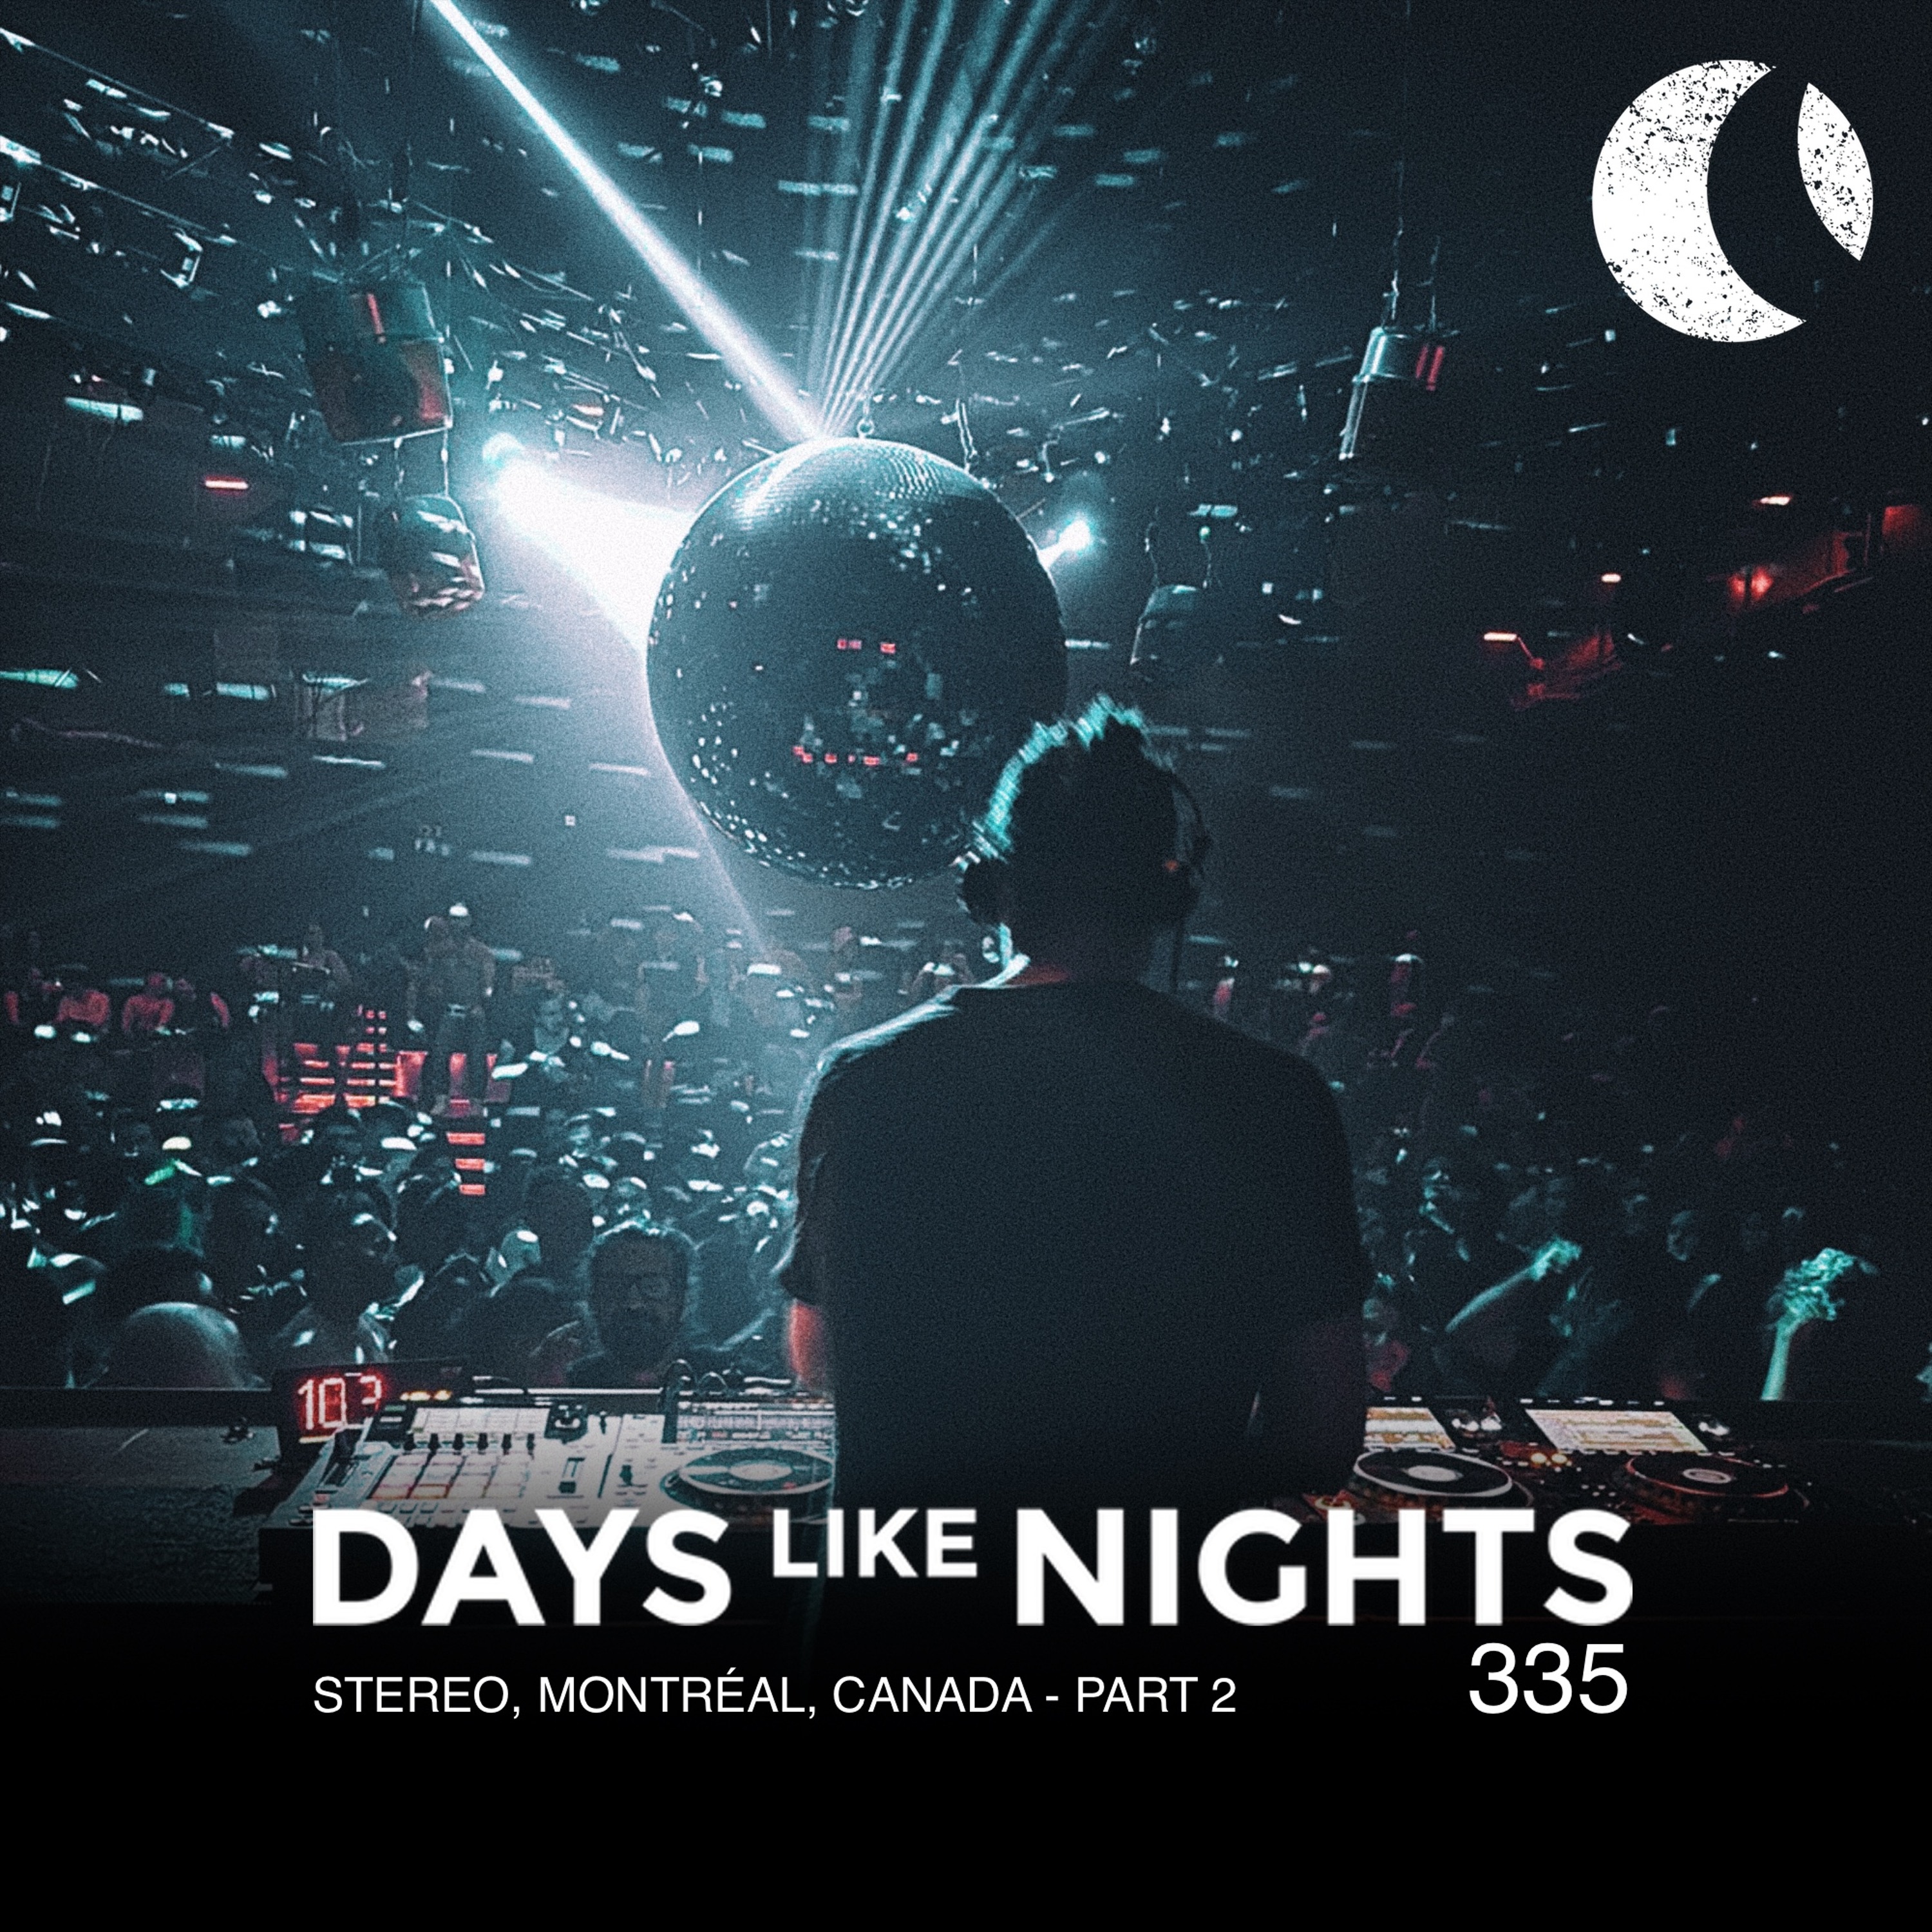 DAYS like NIGHTS 335 - Stereo, Montréal, Canada - Part 2